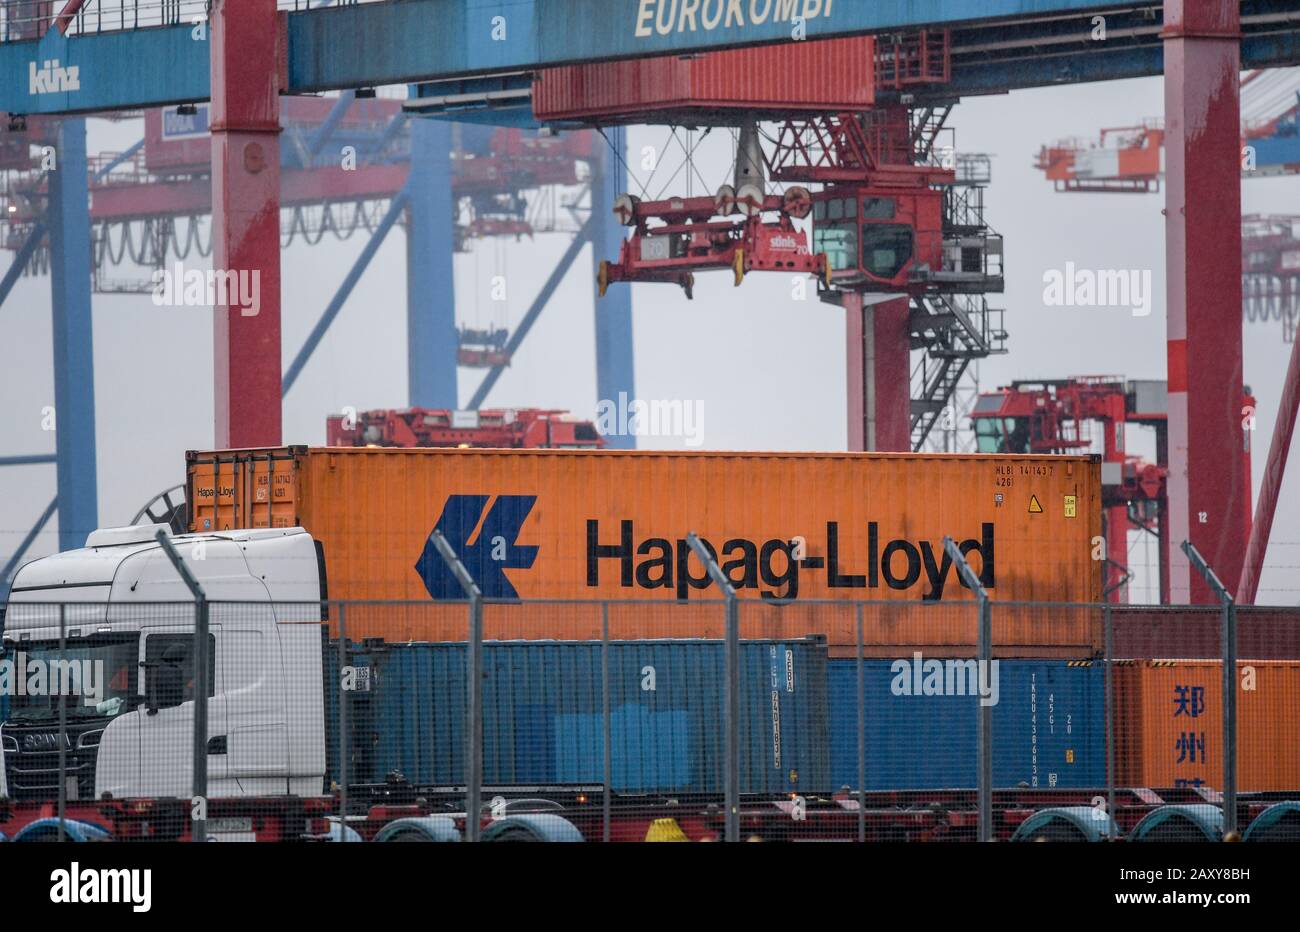 Hamburg, Germany. 13th Feb, Containers from various shipping companies are handled in the port of Hamburg. Credit: Axel Heimken/dpa/Alamy Live News Stock Photo Alamy